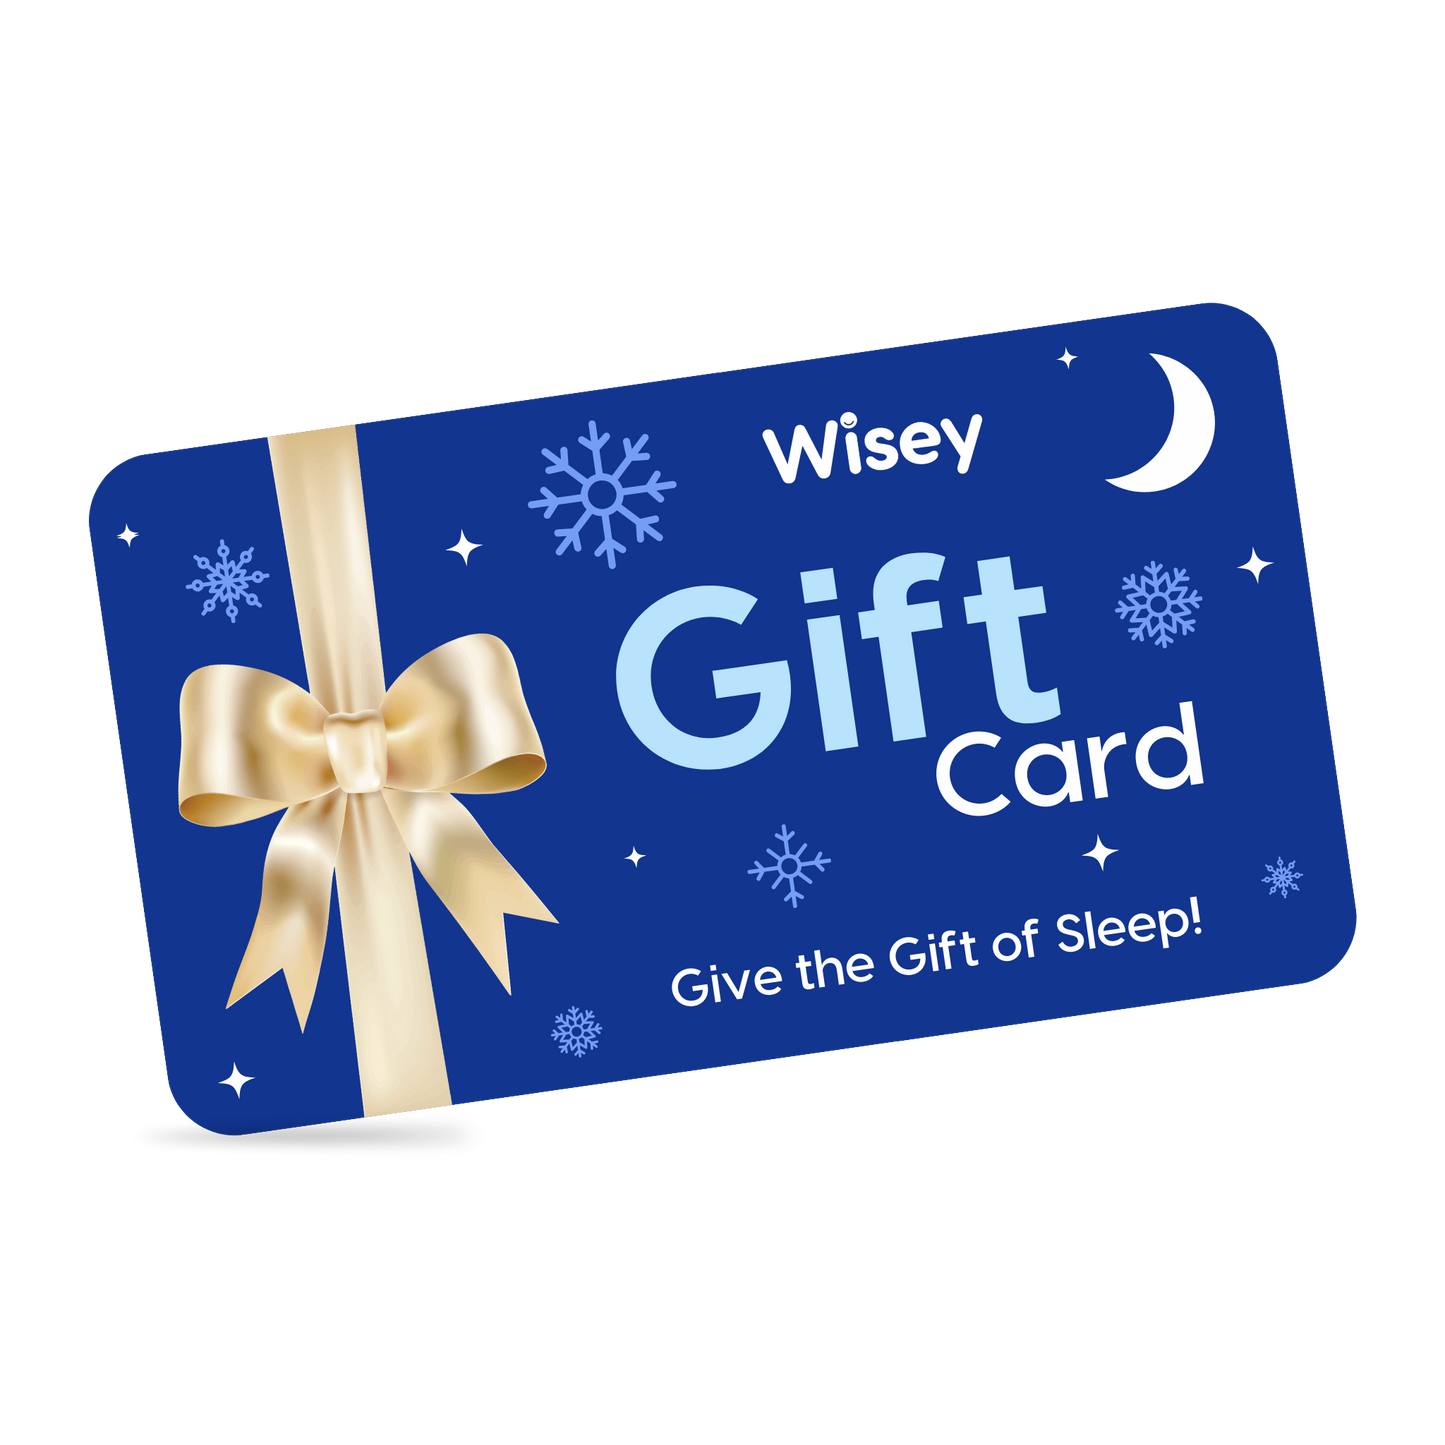 Wisey Gift Card - Wisey